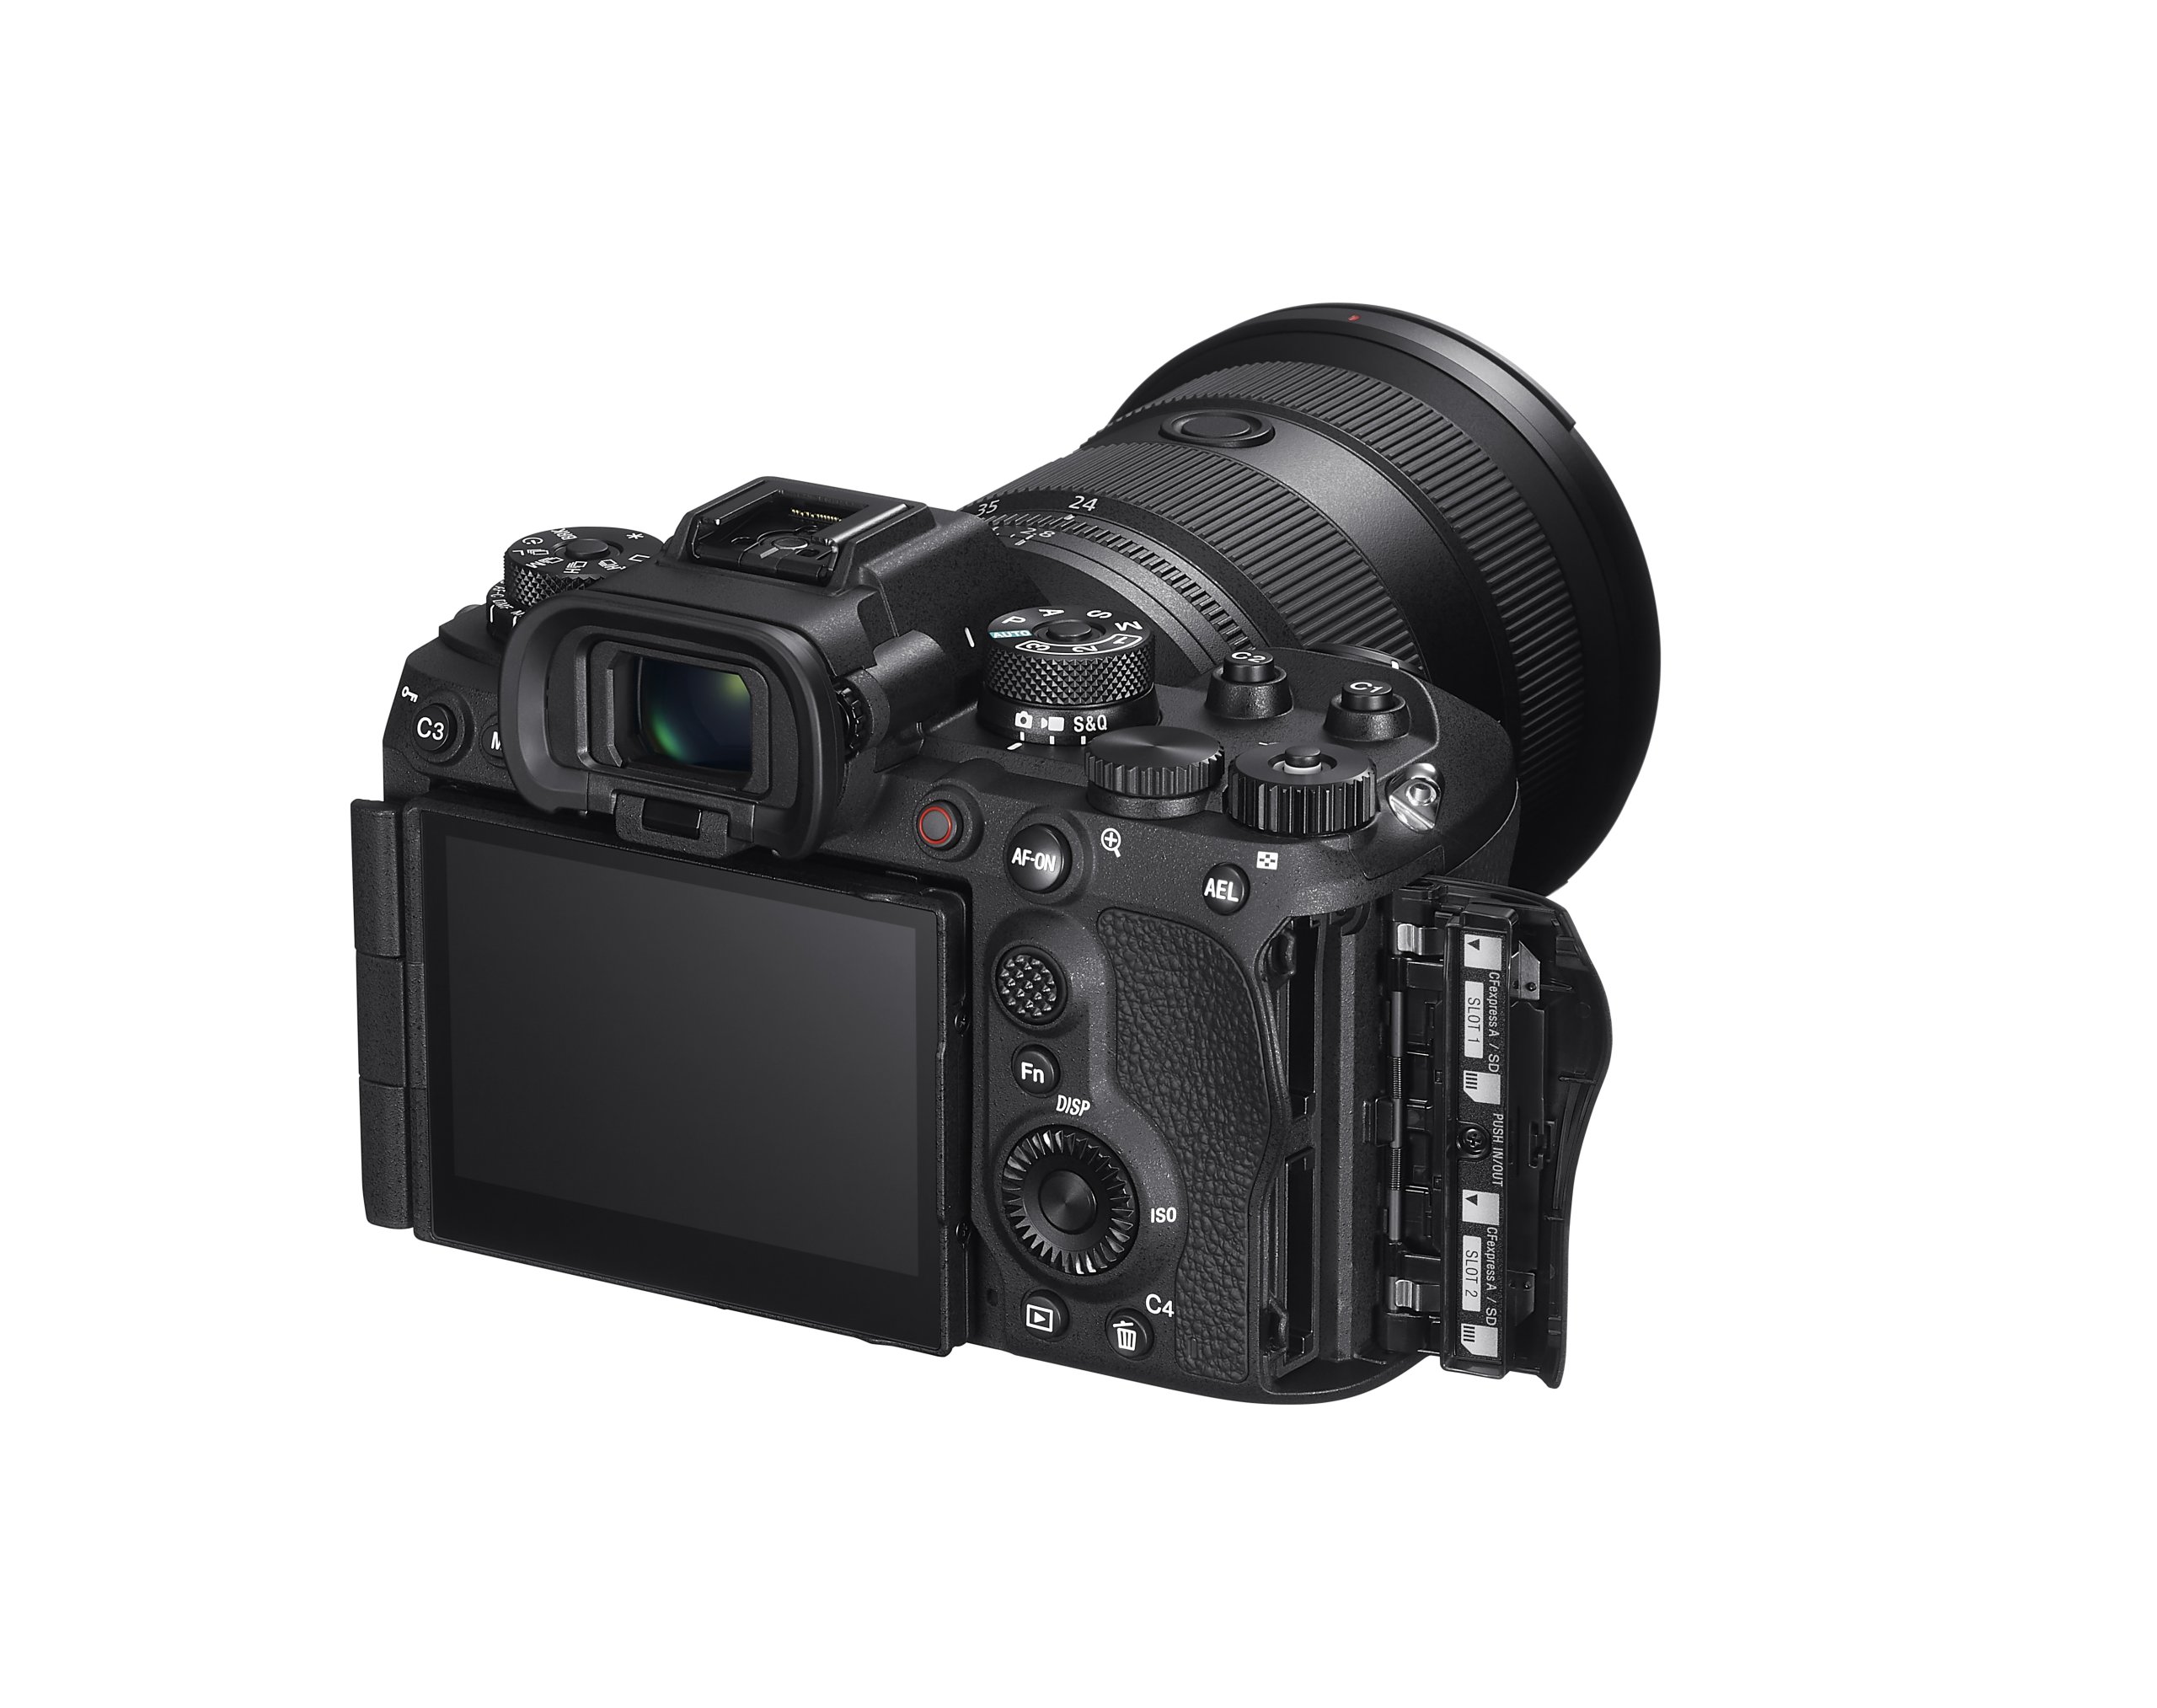 ILCE 9M3 card slot scaled - Sony Electronics Releases the Alpha 9 III; the World's First Full-Frame Camera with a Global Shutter System